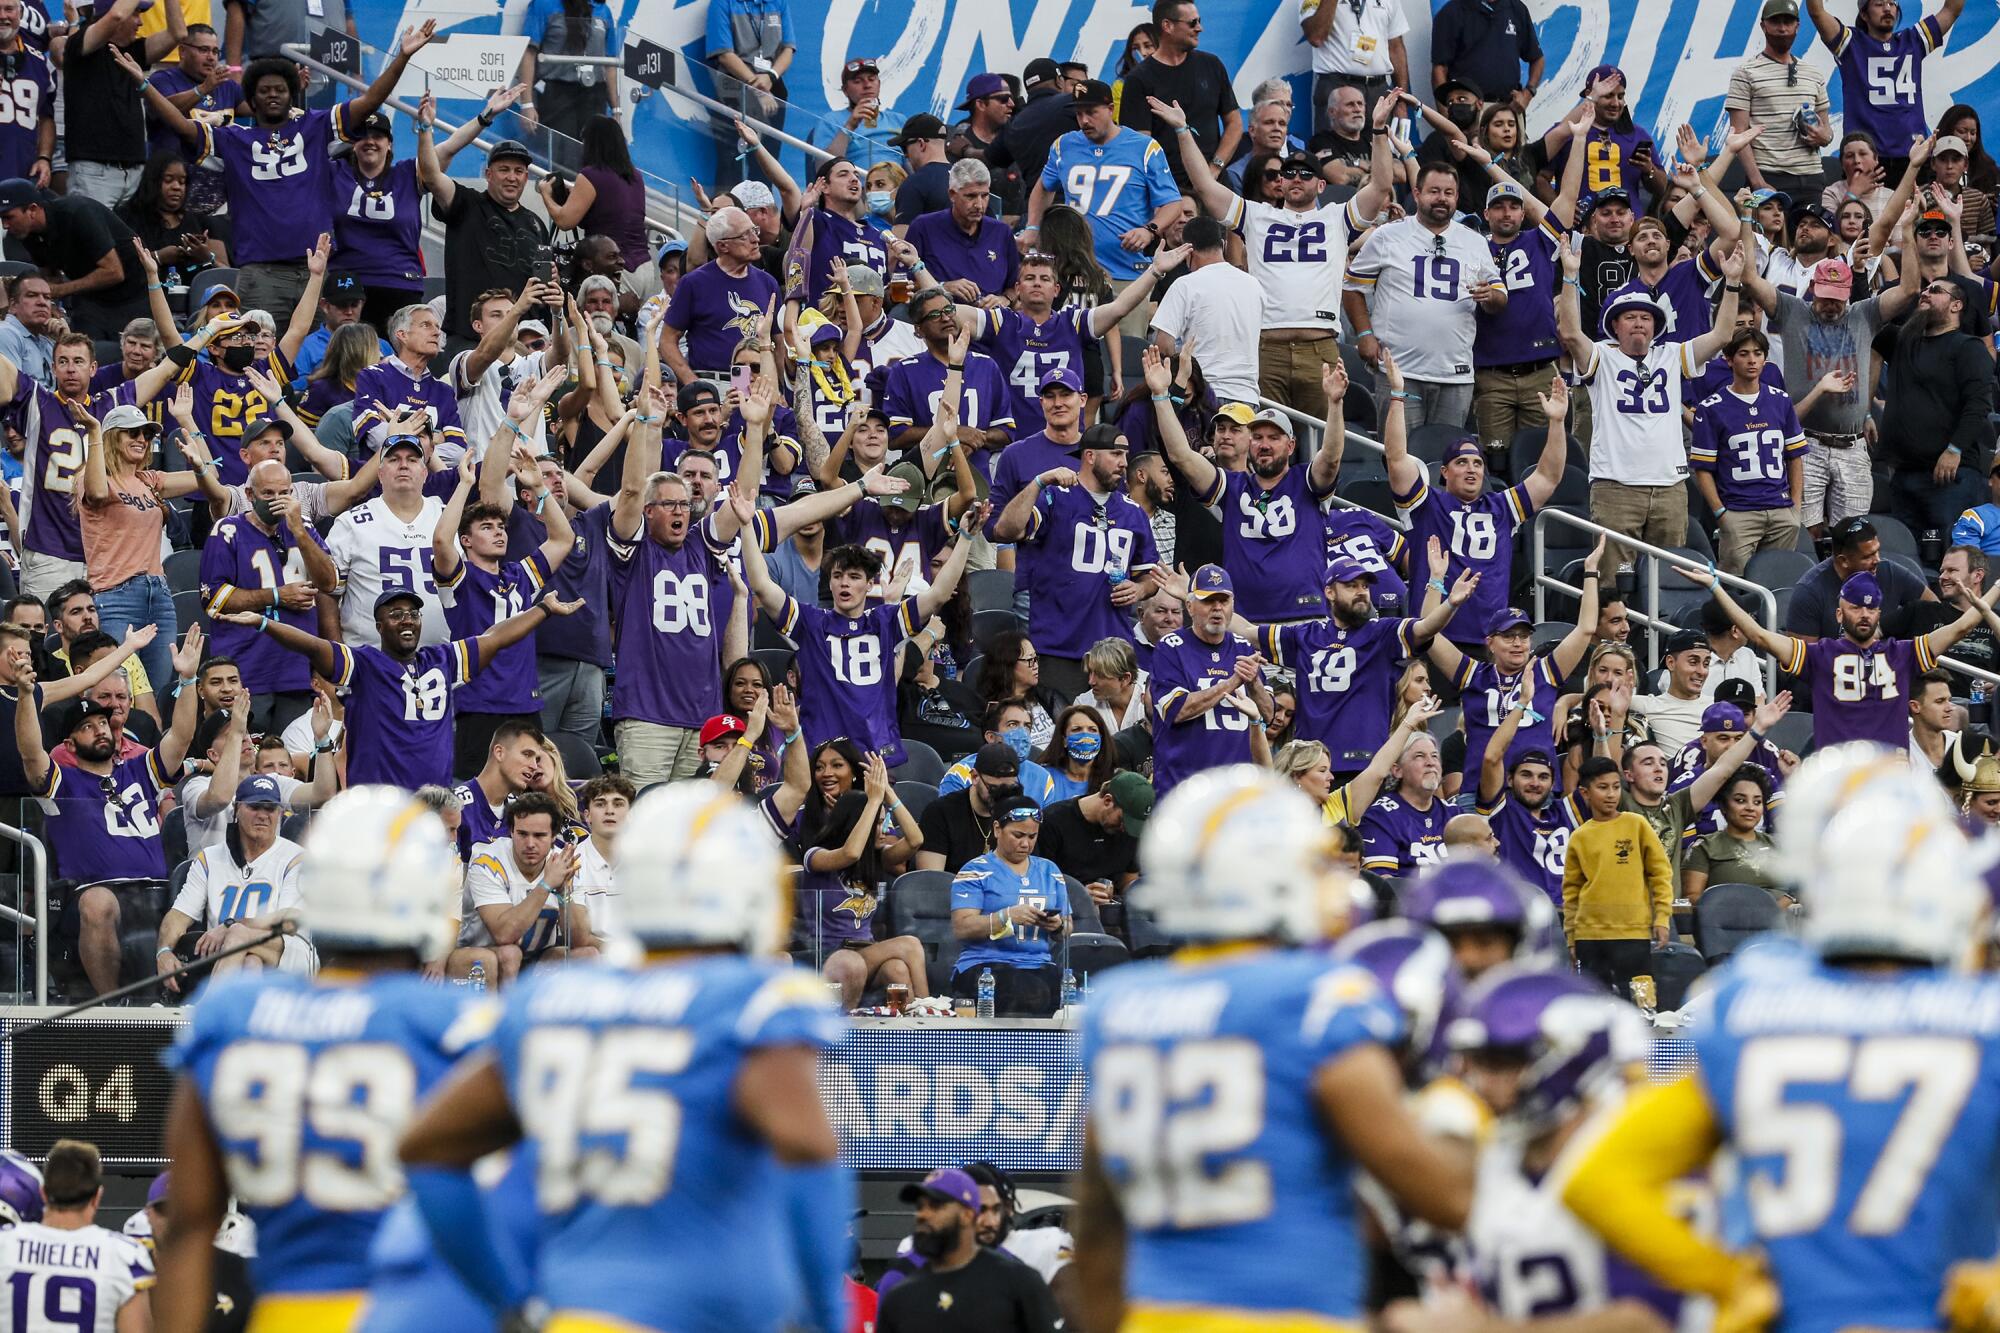 Minnesota Vikings fans conduct a "Skol" chant late in the game against the Chargers.